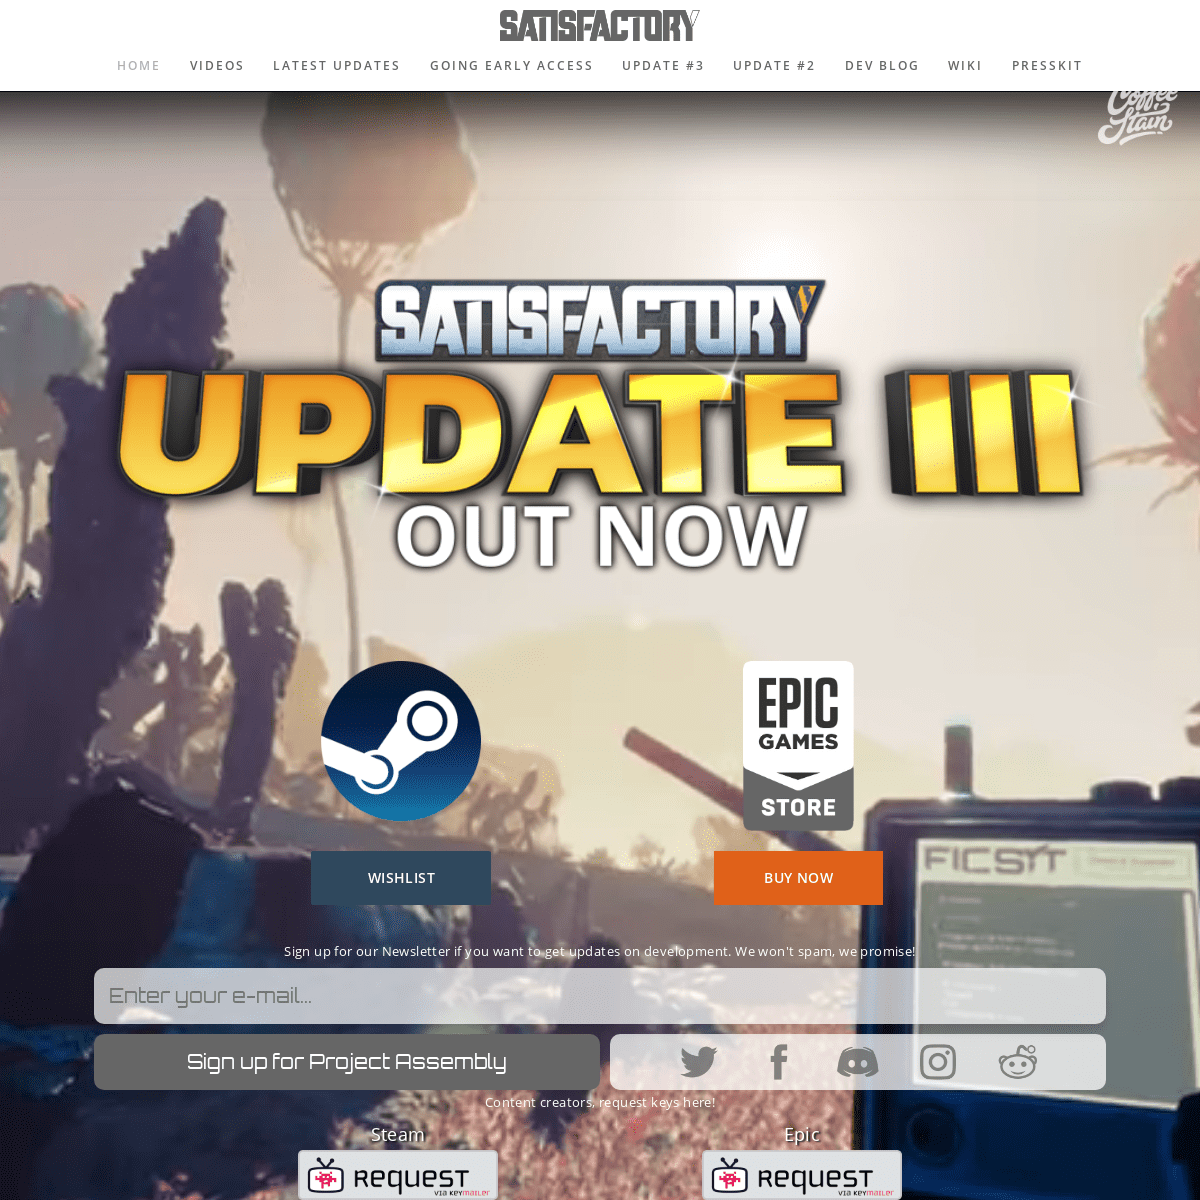 A complete backup of satisfactorygame.com